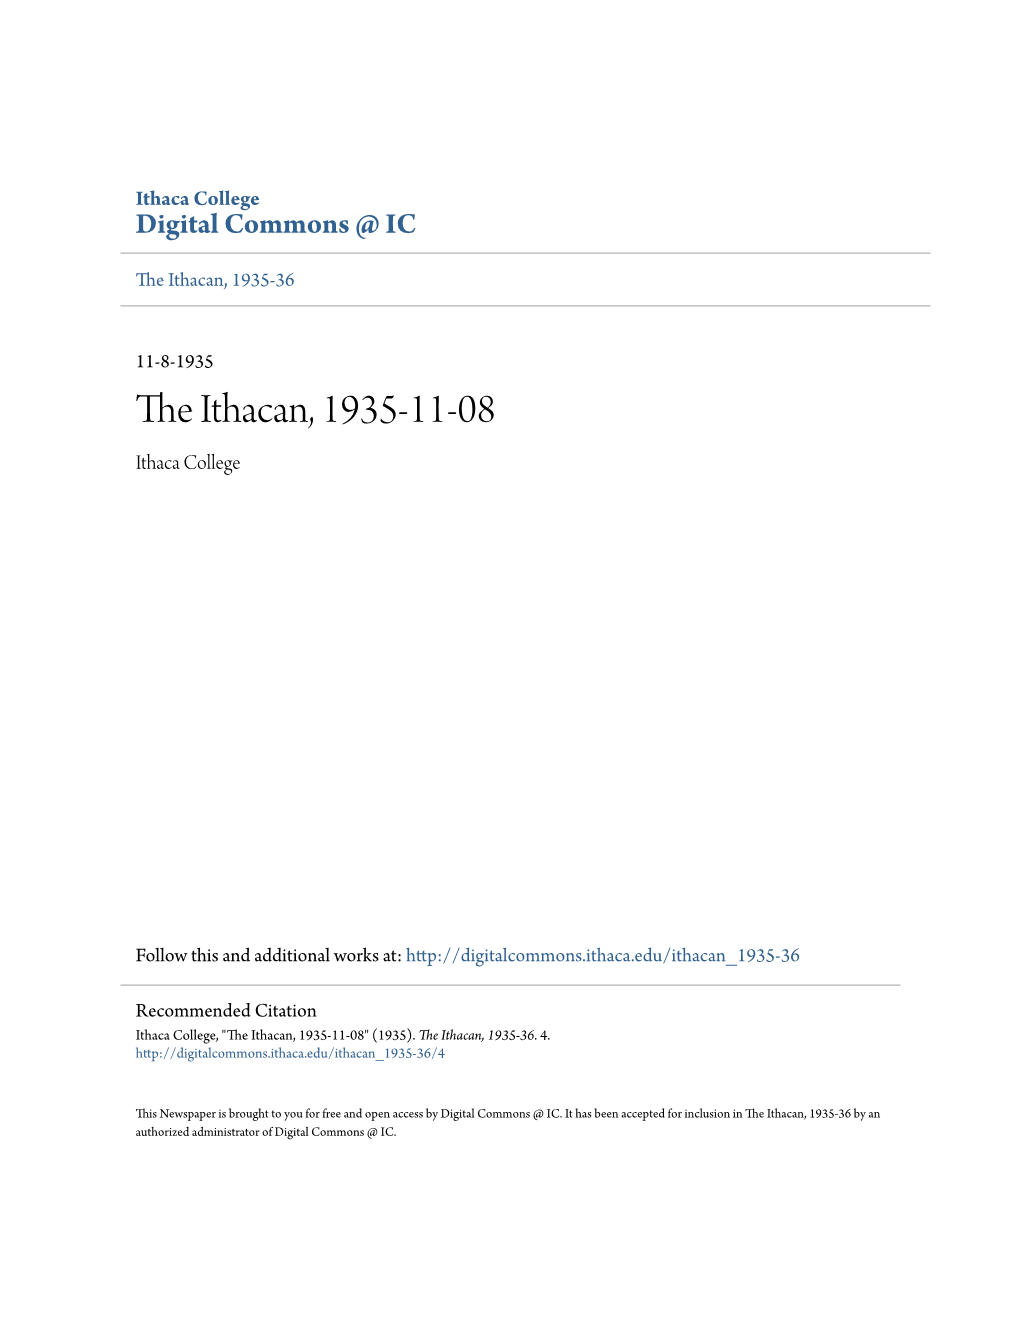 The Ithacan, 1935-11-08